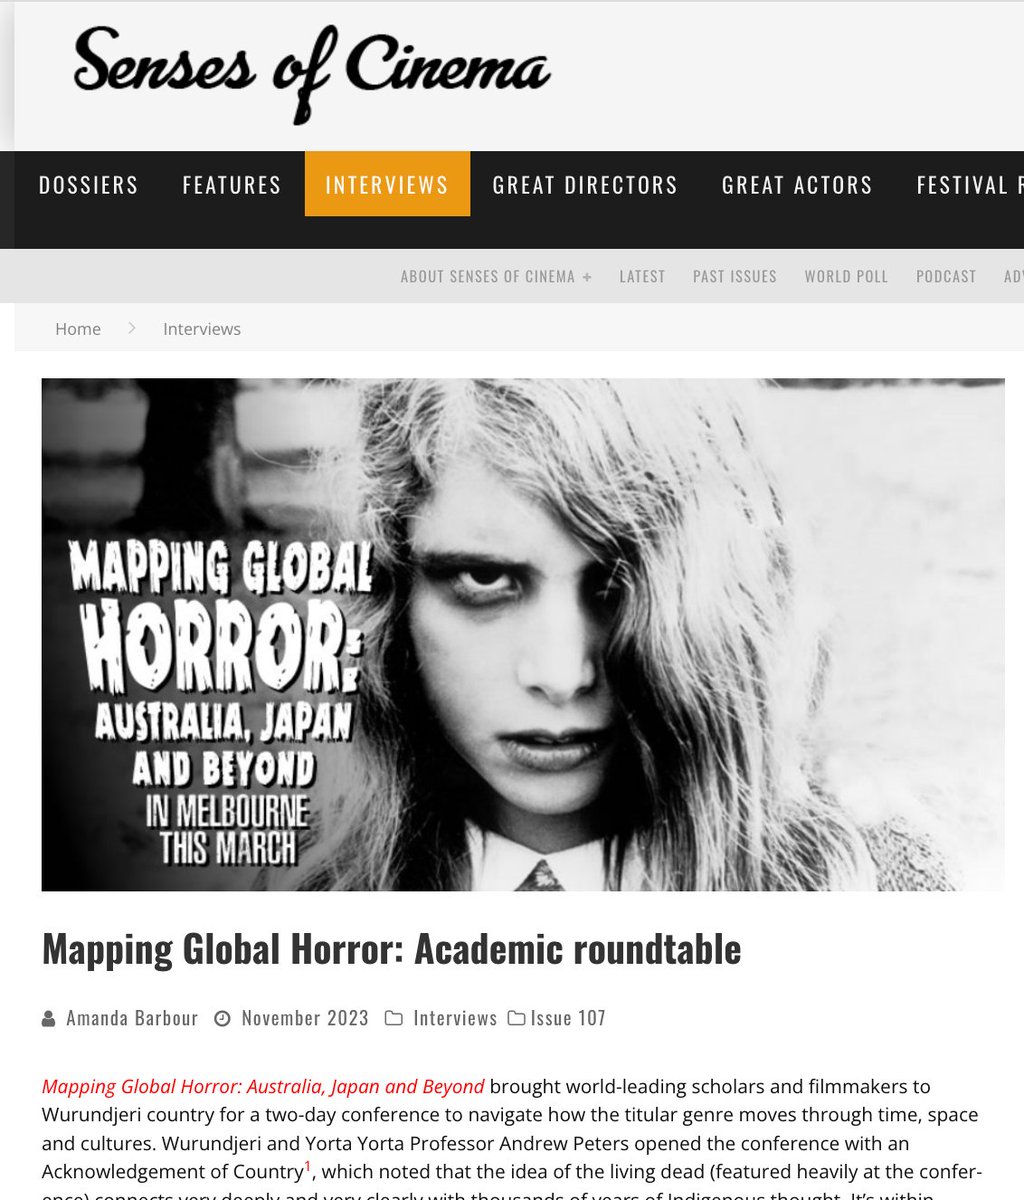 @SensesofCinema reports on last March's #MappingGlobalHorror conference at @ACMI with an academic roundtable on cross-cultural scares + a chat w/genre filmmakers. @alippit @batndal @StaceyAbbottRU @adamjdaniel @isabel_peppard @raphaelitequeen @nejames sensesofcinema.com/2023/interview…